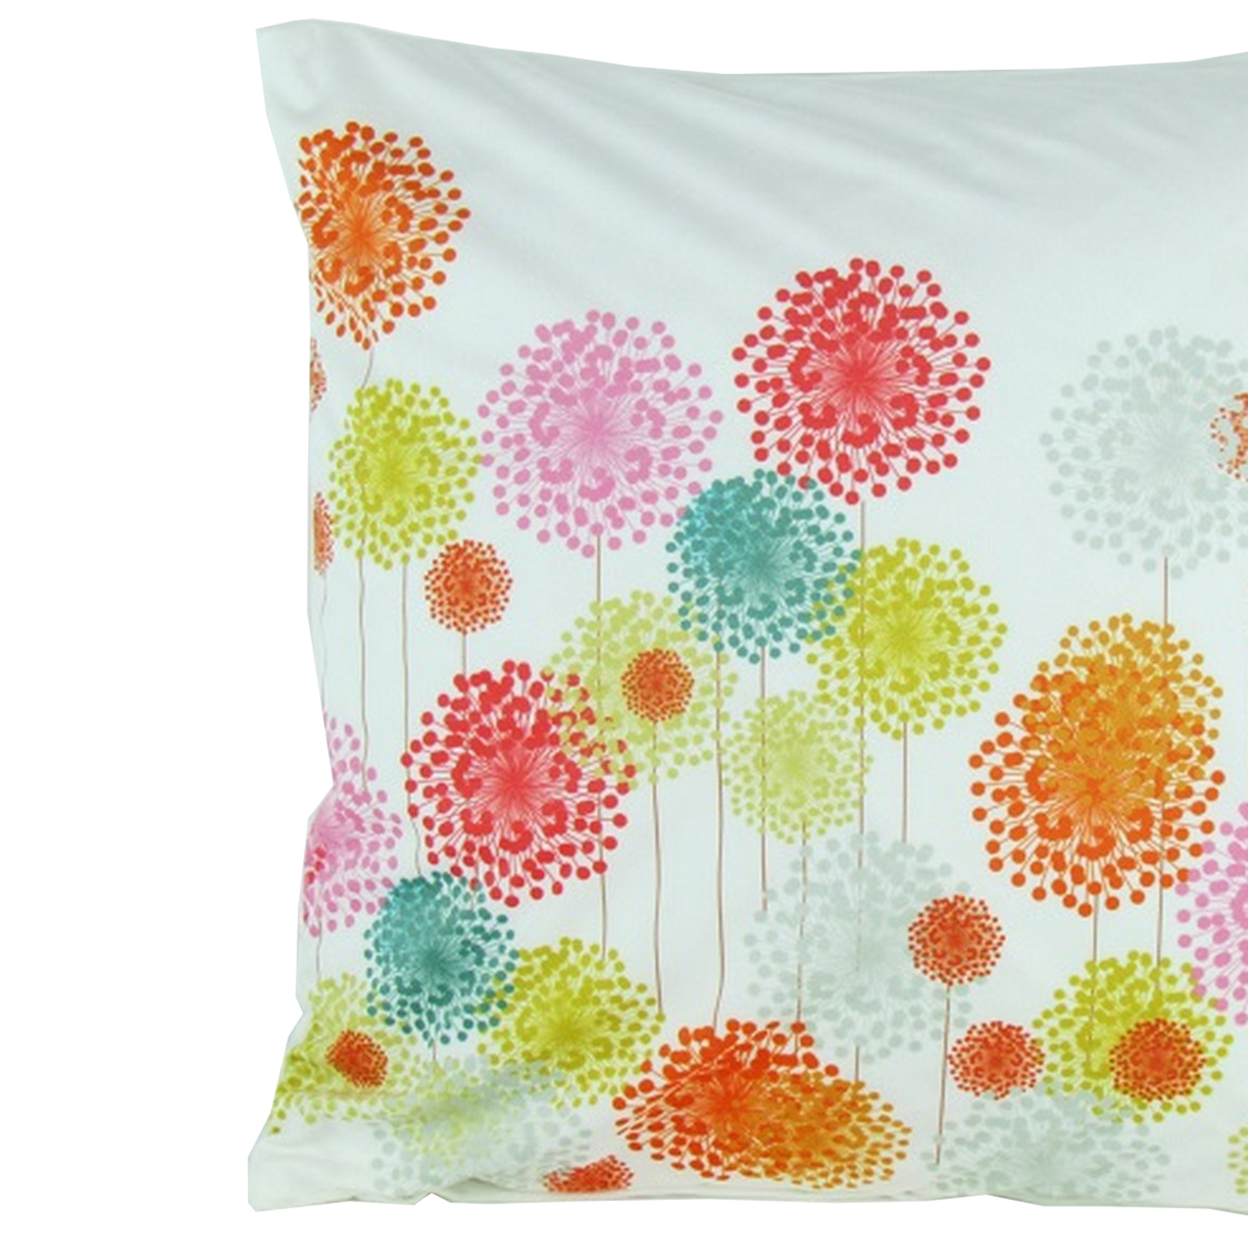 Fabric Accent Pillow With Floral Pattern, Multicolor- Saltoro Sherpi